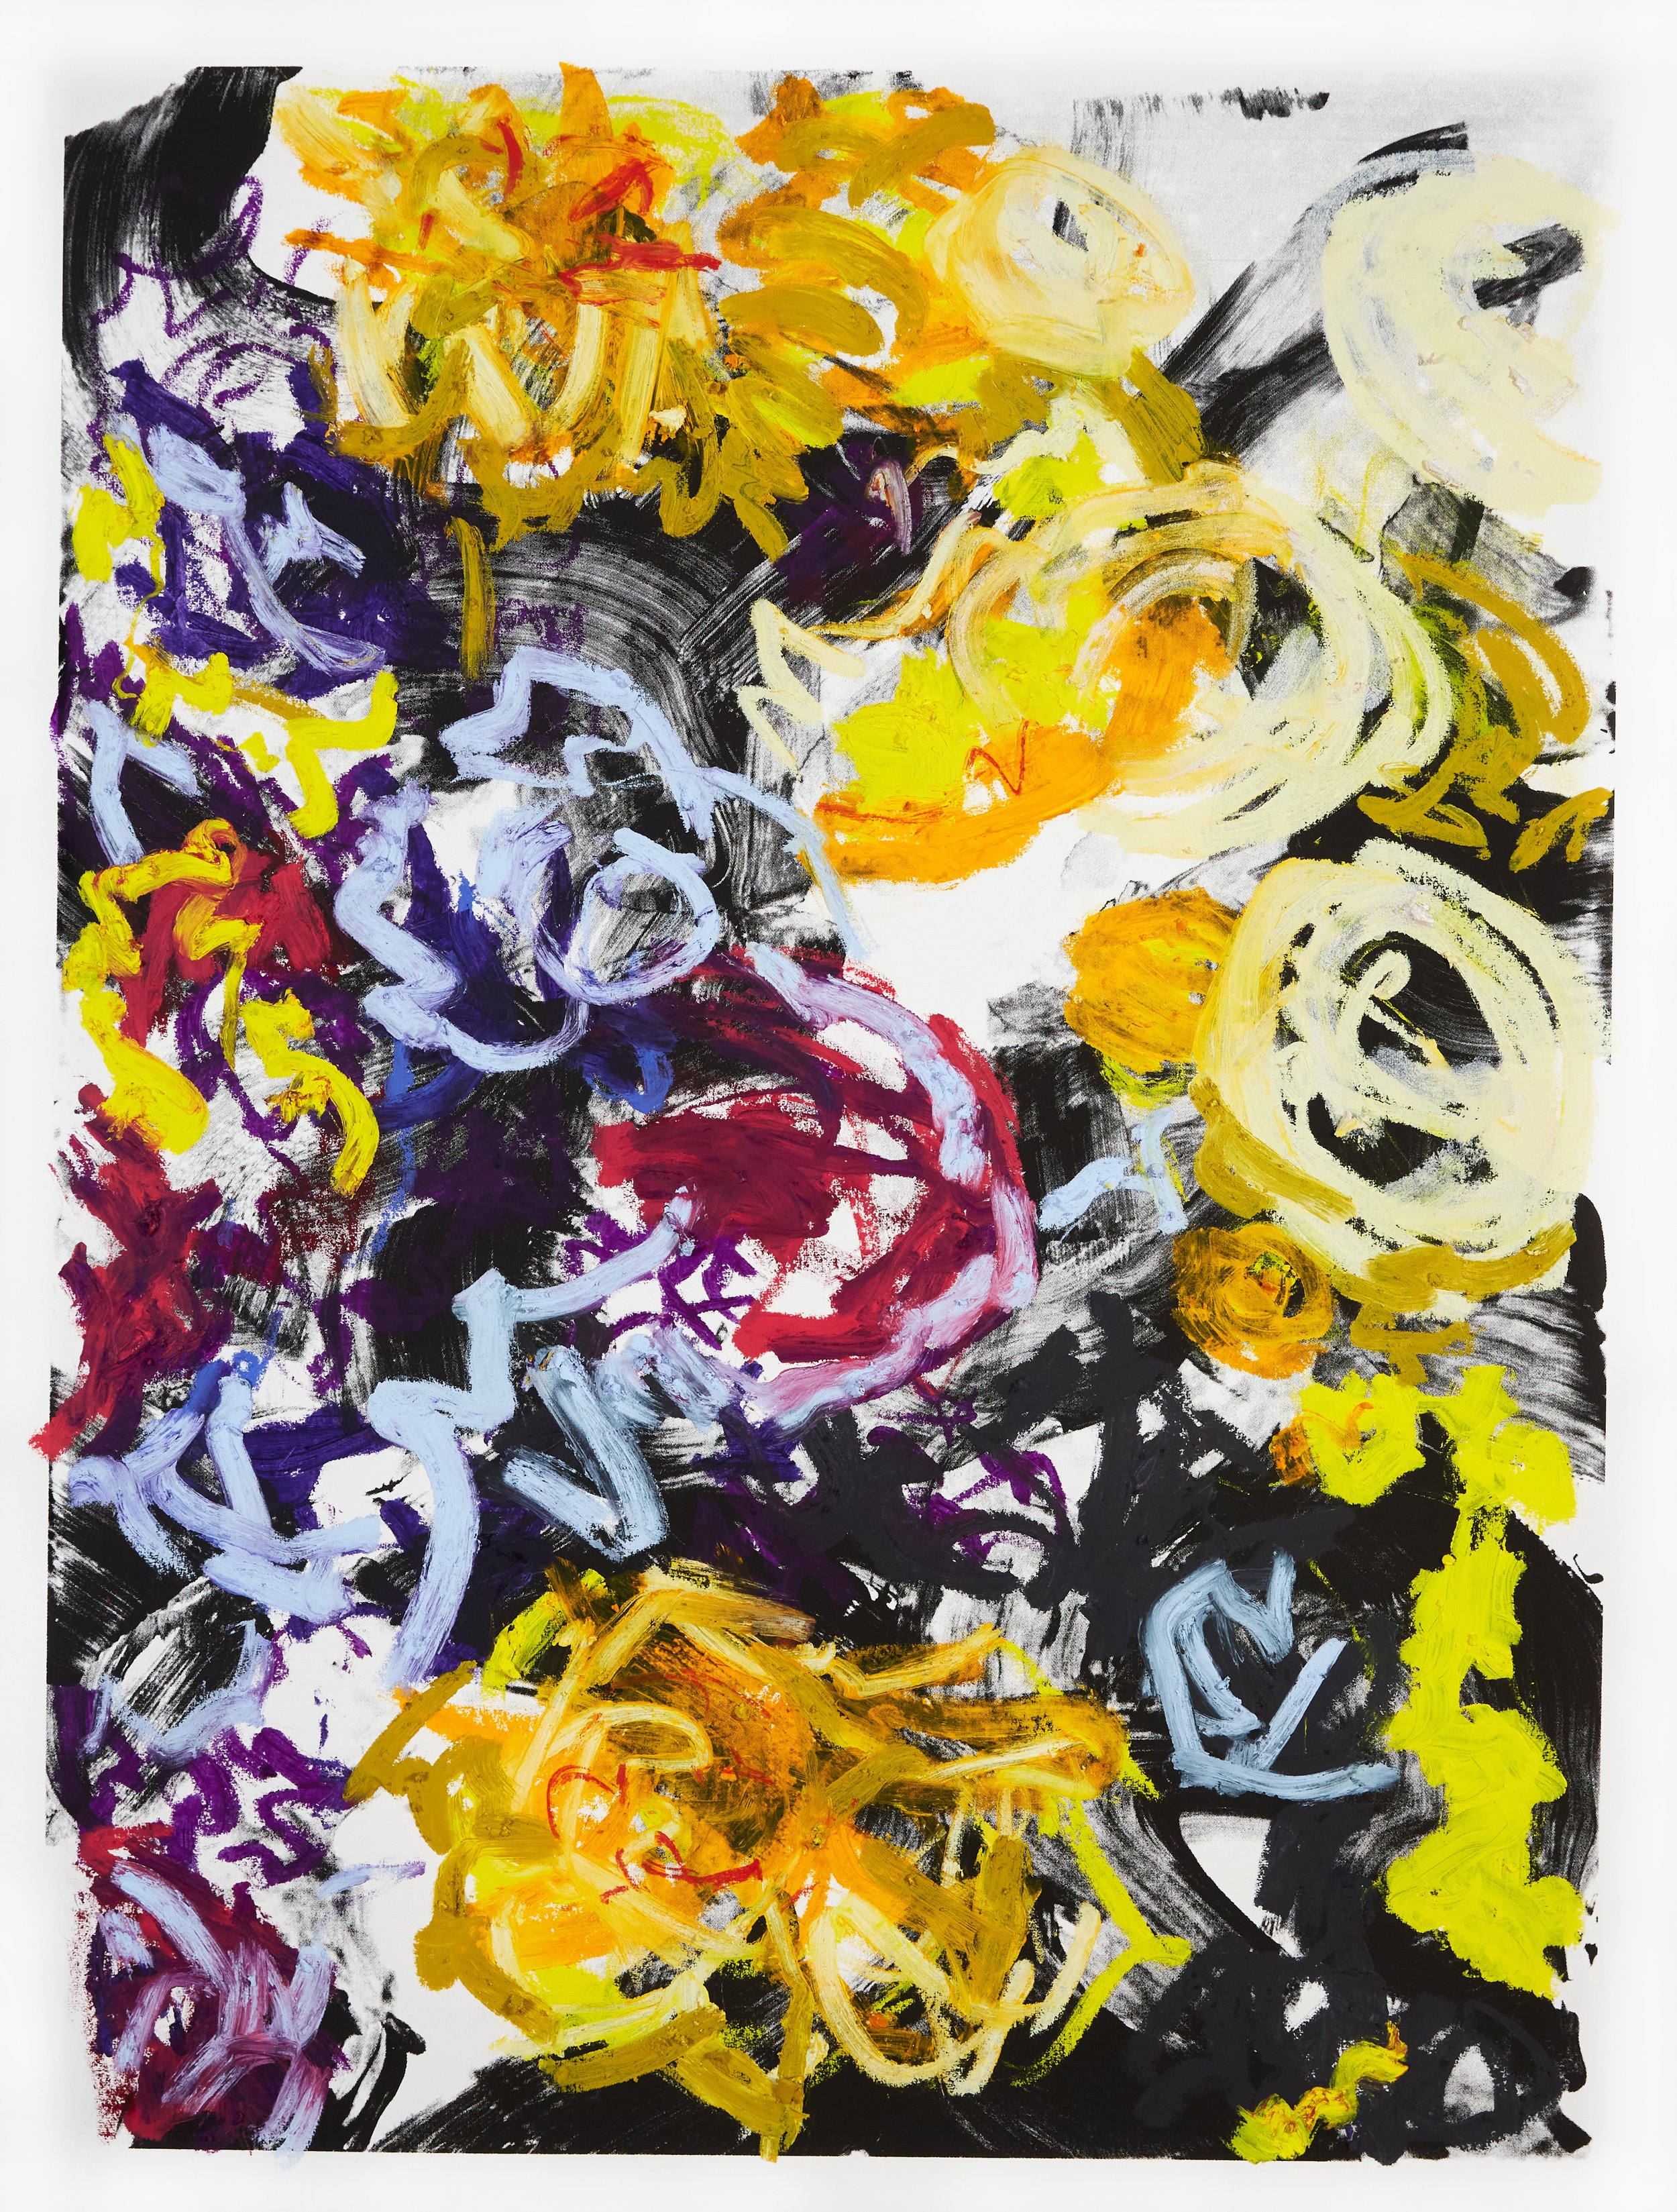  BECOMING SOMEONE ELSE: COMPLIMENTARY YELLOW AND PURPLE (MONOPRINT), 2023, Oil stick and paper monoprint (black), 40 x 30 inches, labeled “M.P.,” signed, and dated, unframed, Private Collection